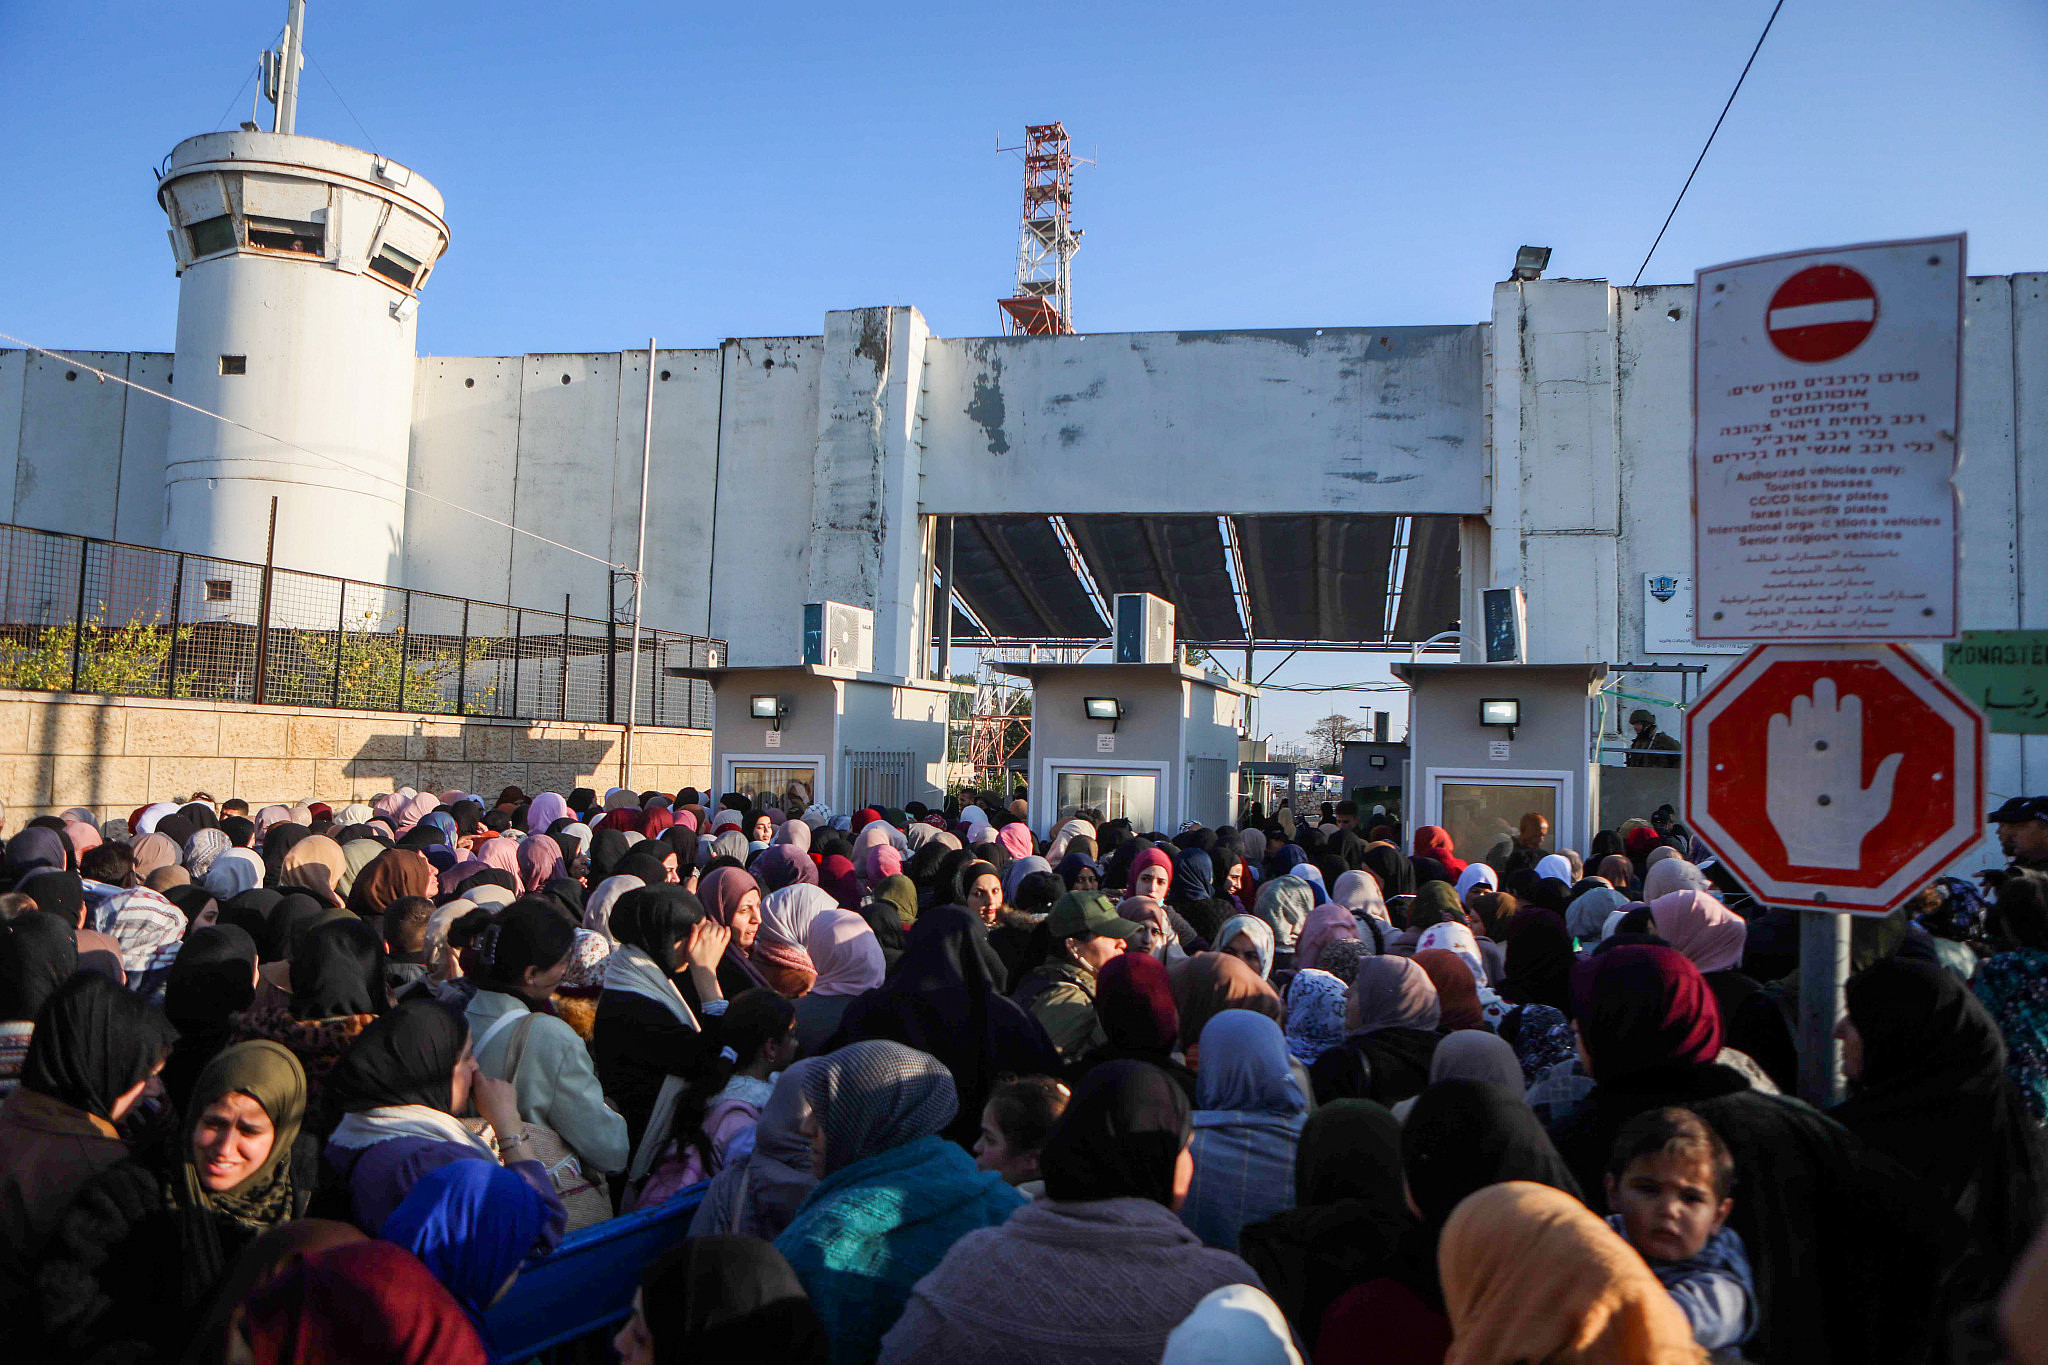 Palestinians make their way through an Israeli checkpoint to attend the last Friday prayers of Ramadan in Jerusalem's Al-Aqsa mosque, in Bethlehem, in the West Bank April 14, 2023. (Wisam Hashlamoun/Flash90)